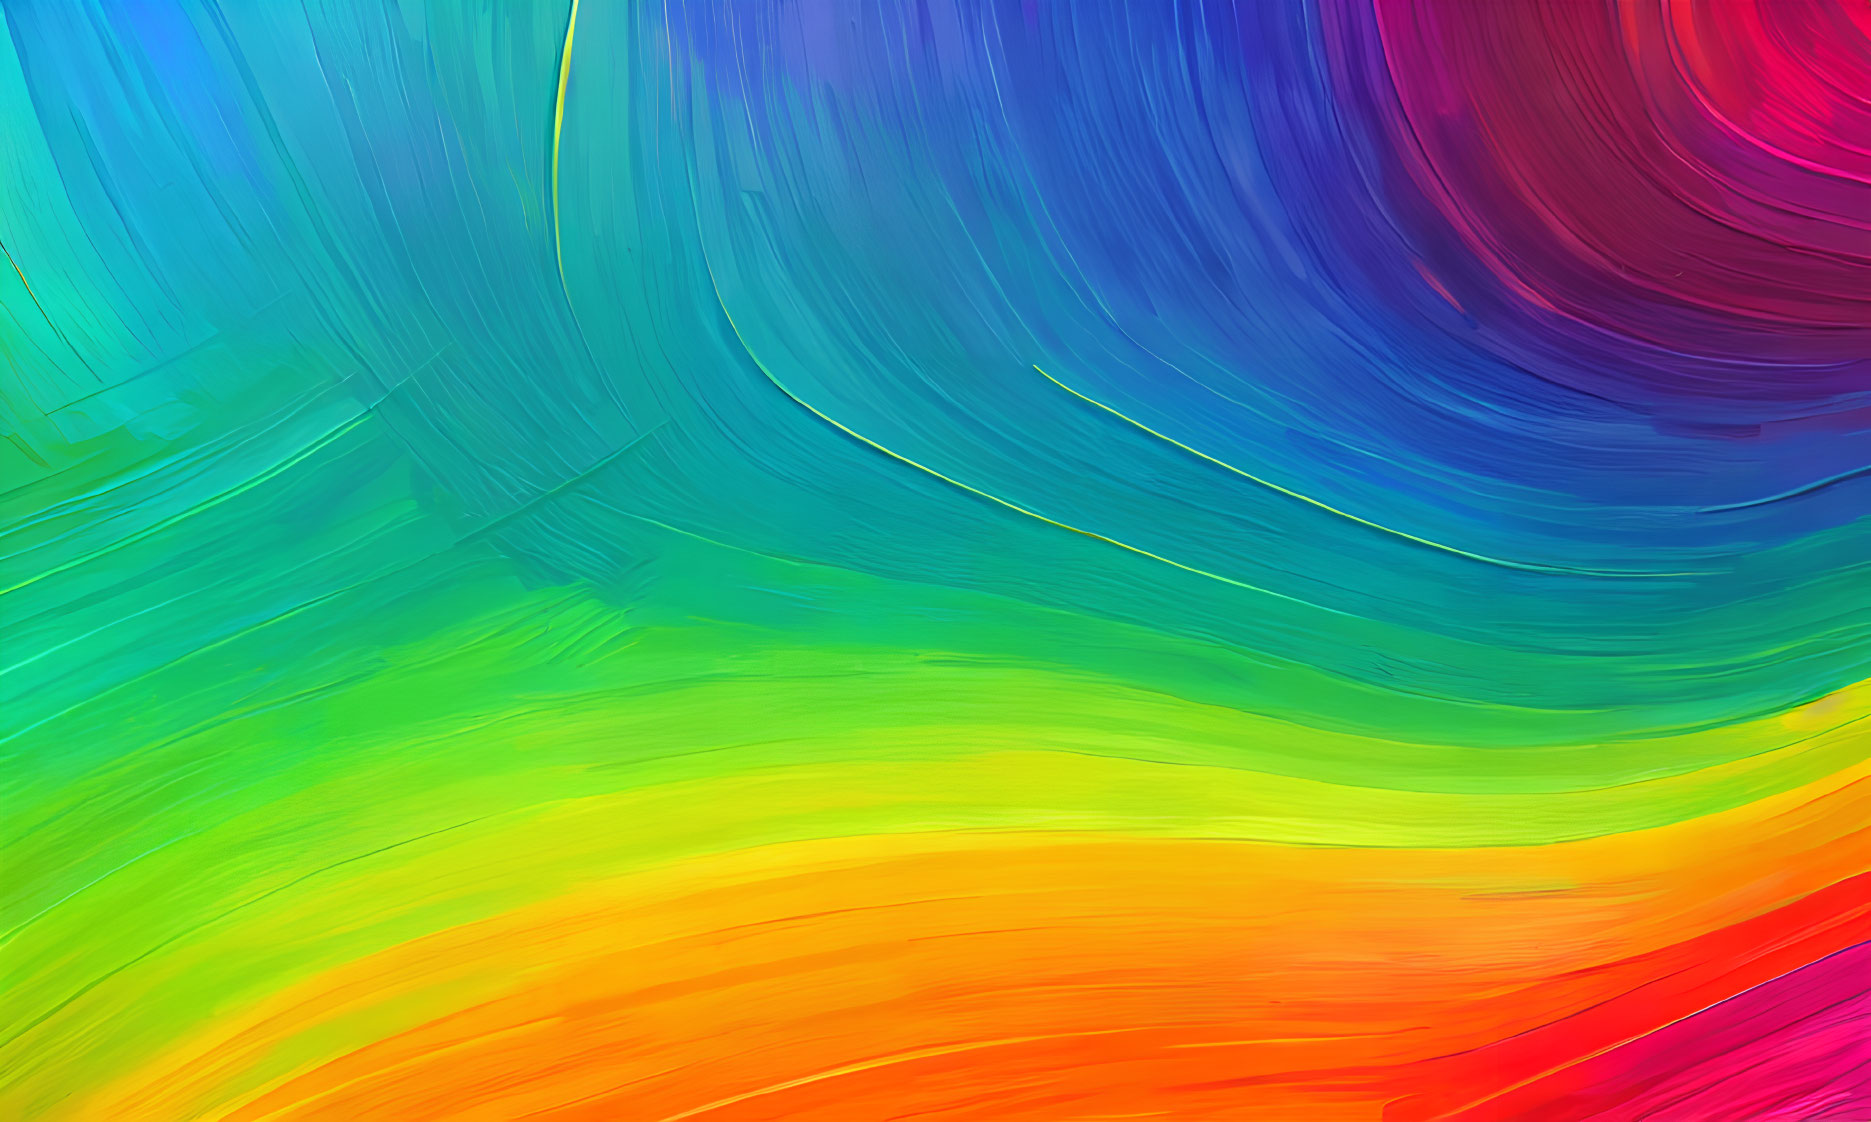 Colorful Abstract Swirls Transitioning in Rainbow Spectrum